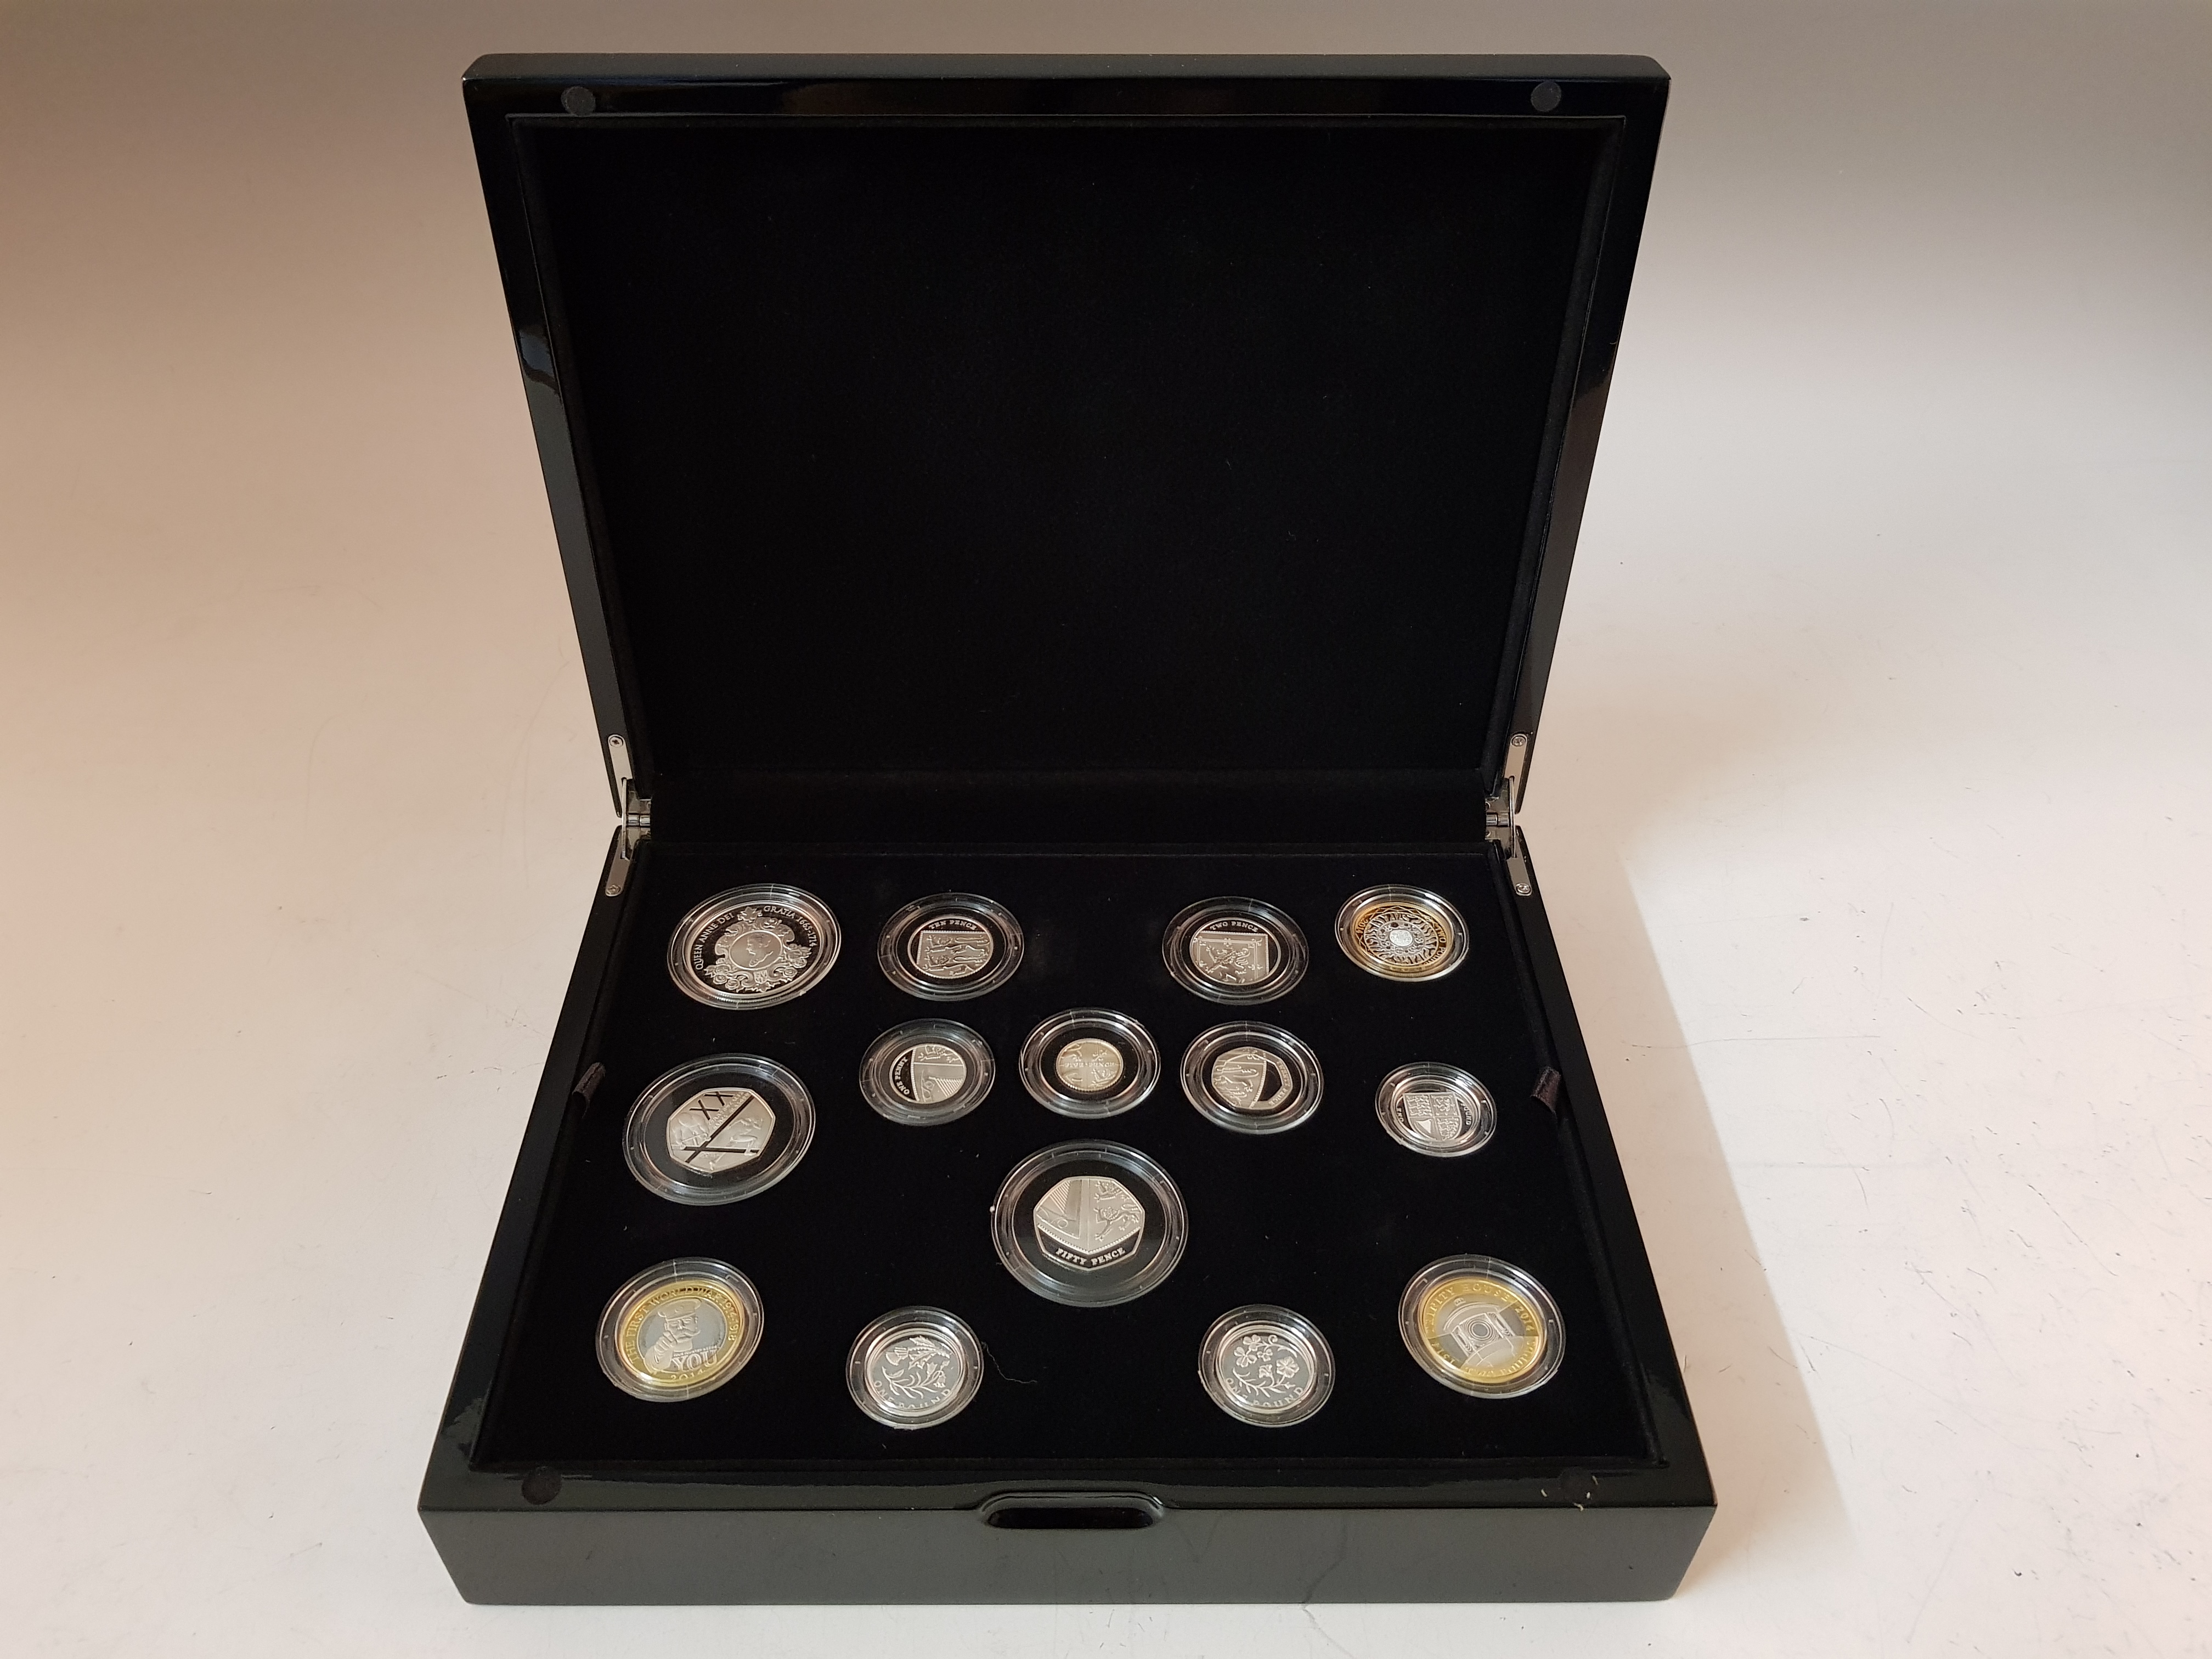 A Royal Mint 2014 silver proof coin set of 14 coins in box.